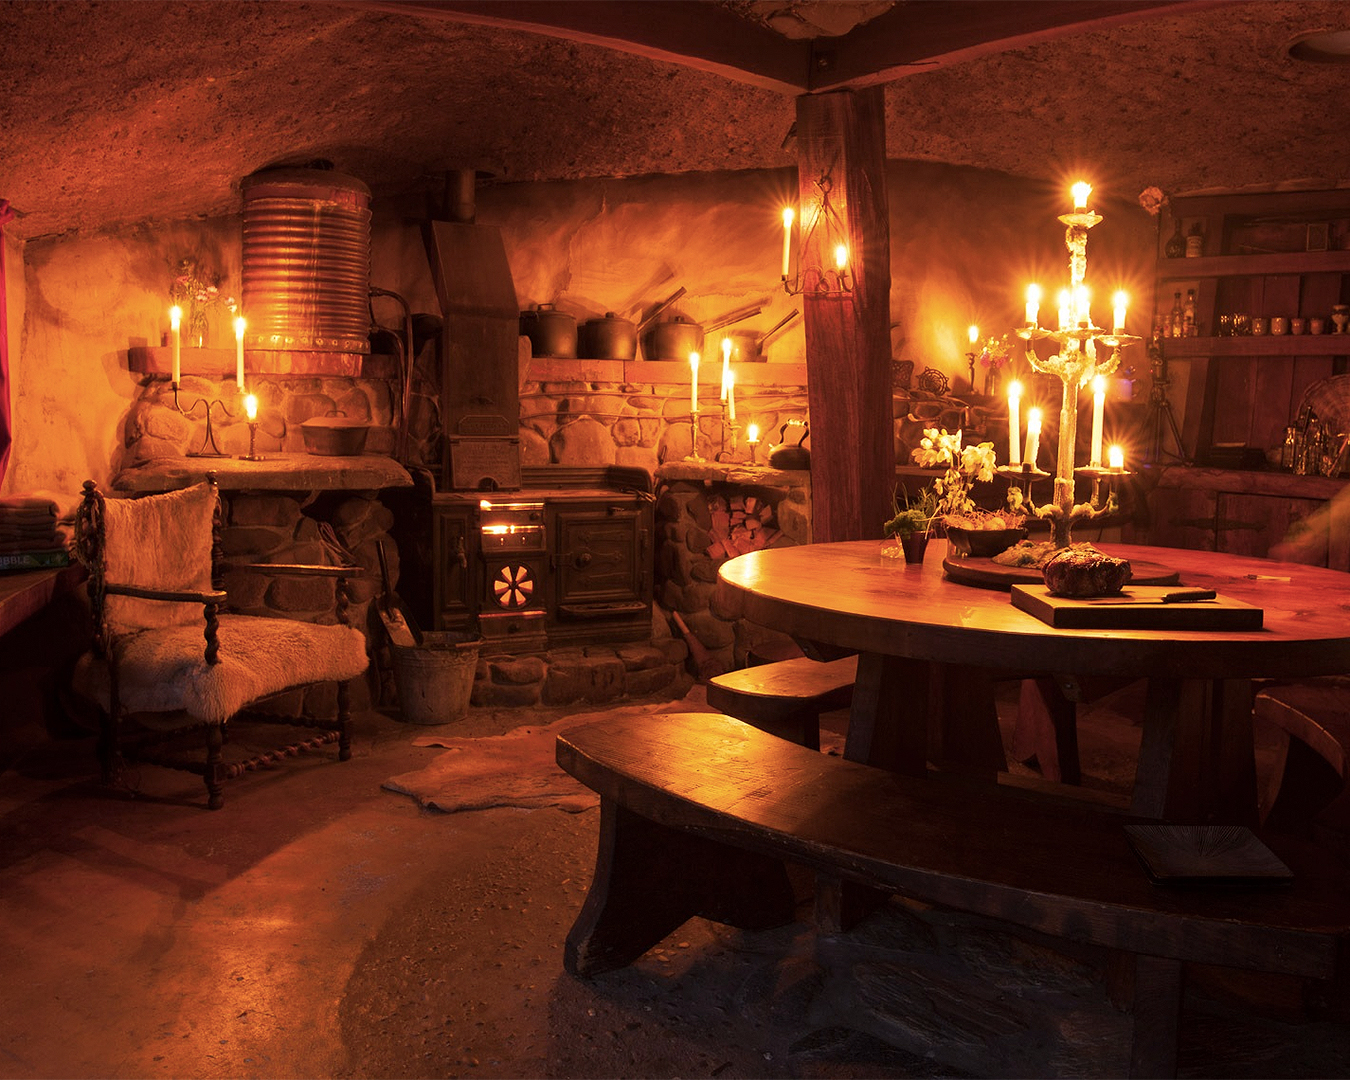 The cosy hobbit-like interior at Underhill Valley.